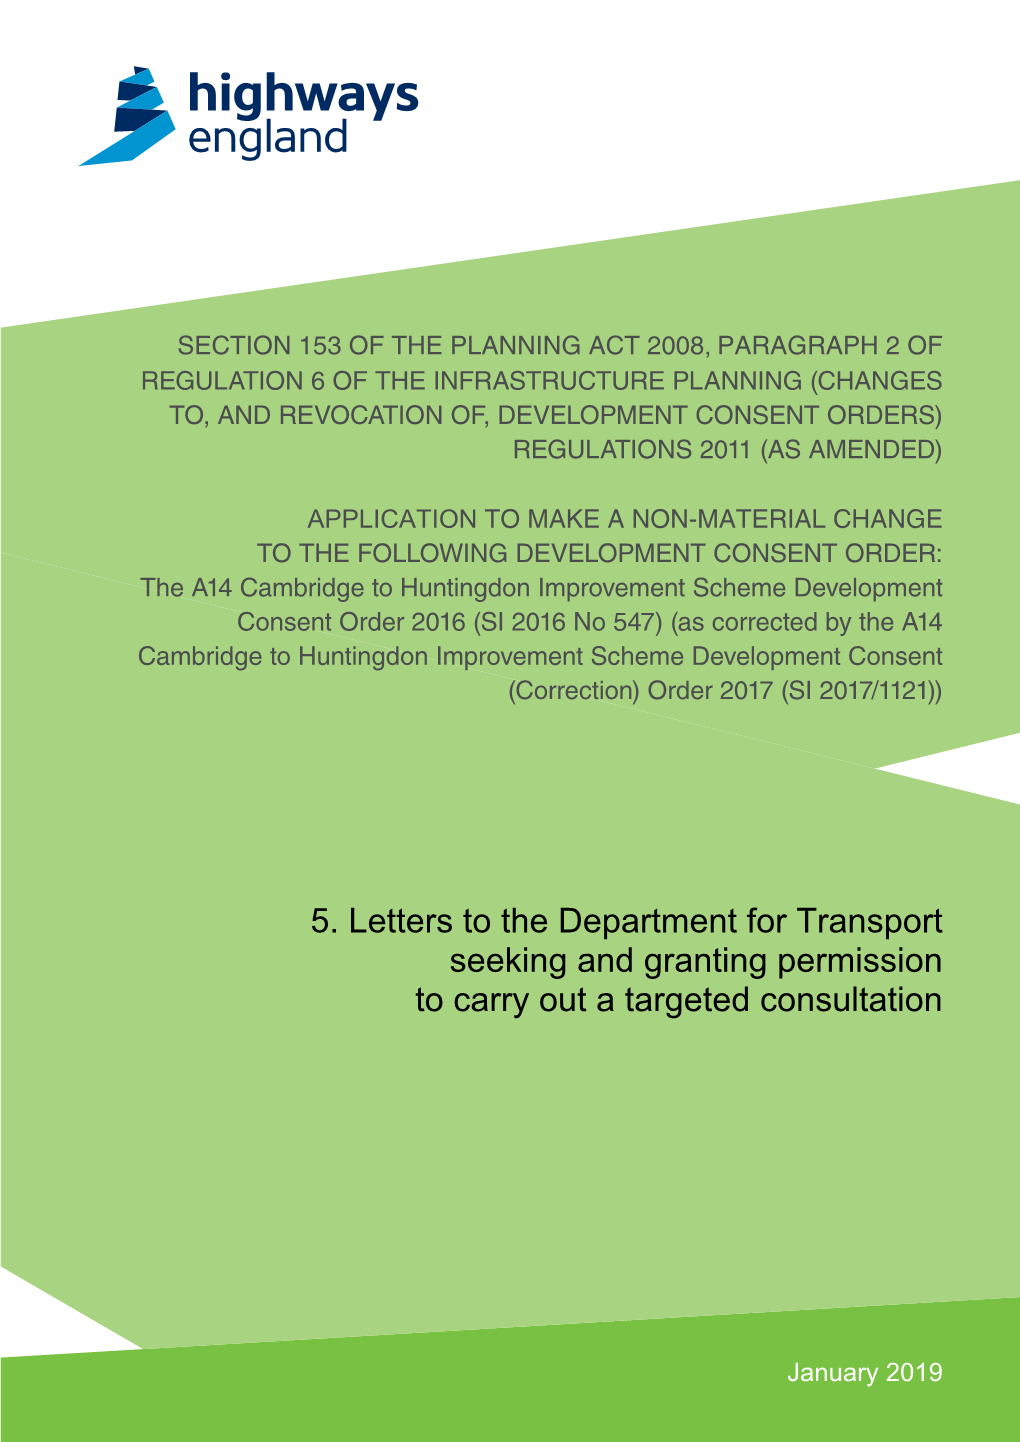 5. Letters to the Department for Transport Seeking and Granting Permission to Carry out a Targeted Consultation